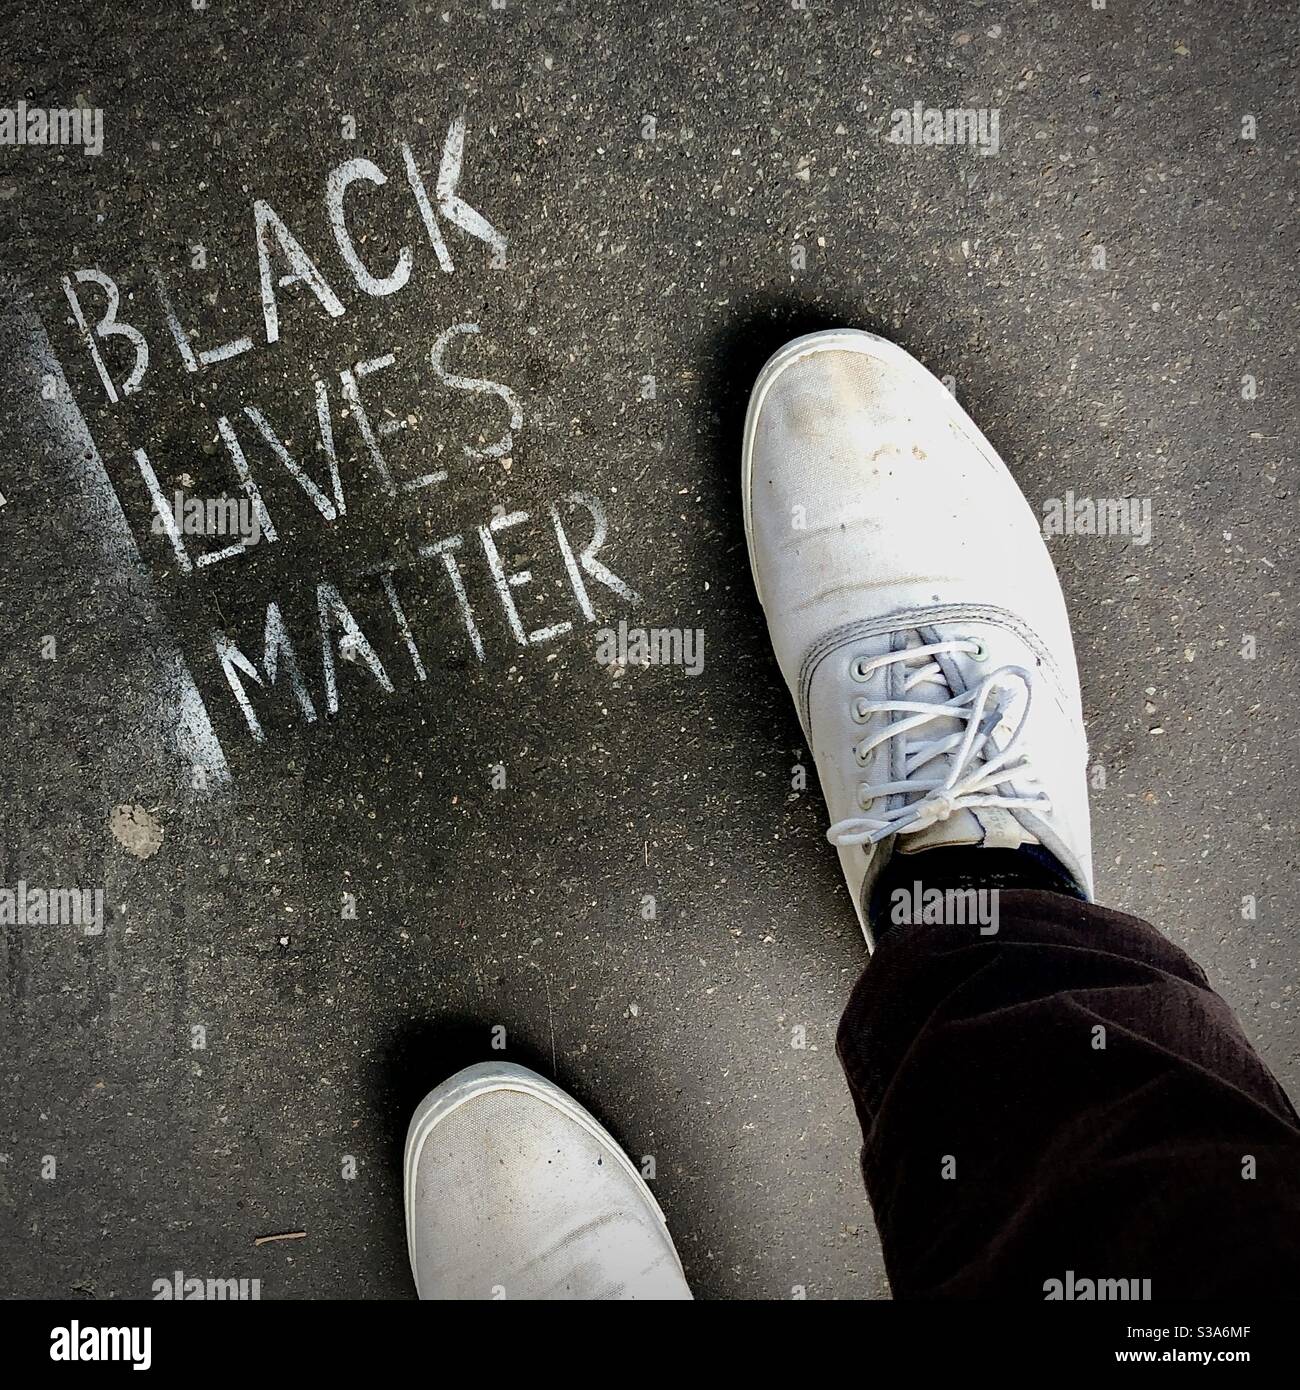 “Black Lives Matter” message stenciled onto public pavement in Tours, central France. Stock Photo